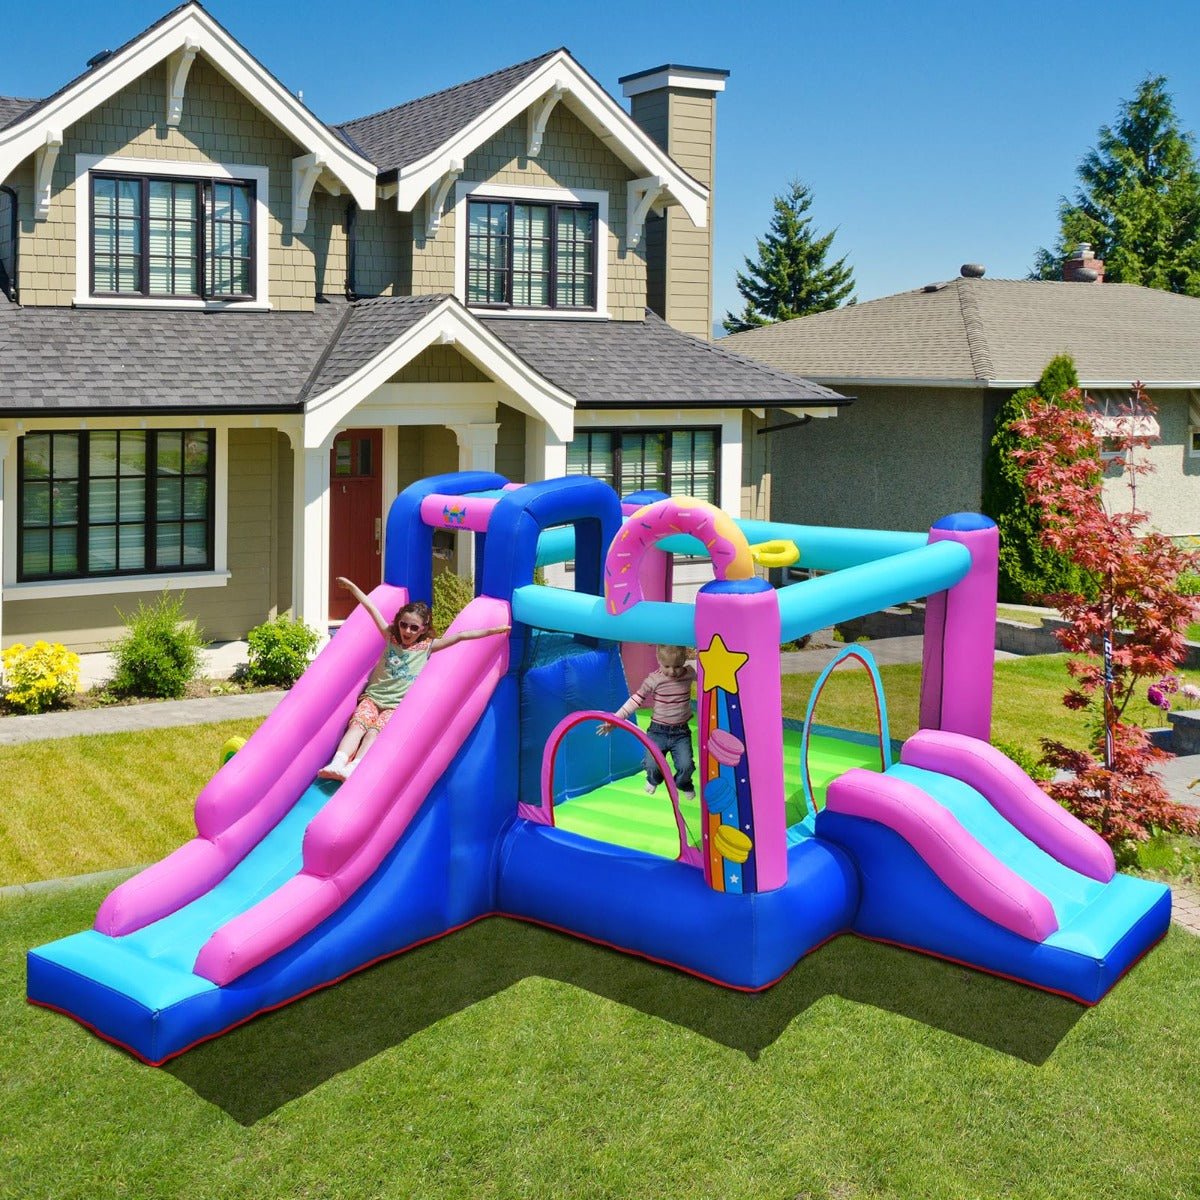 Double Slide Inflatable Bounce House: Outdoor & Indoor Fun (Blower Included)